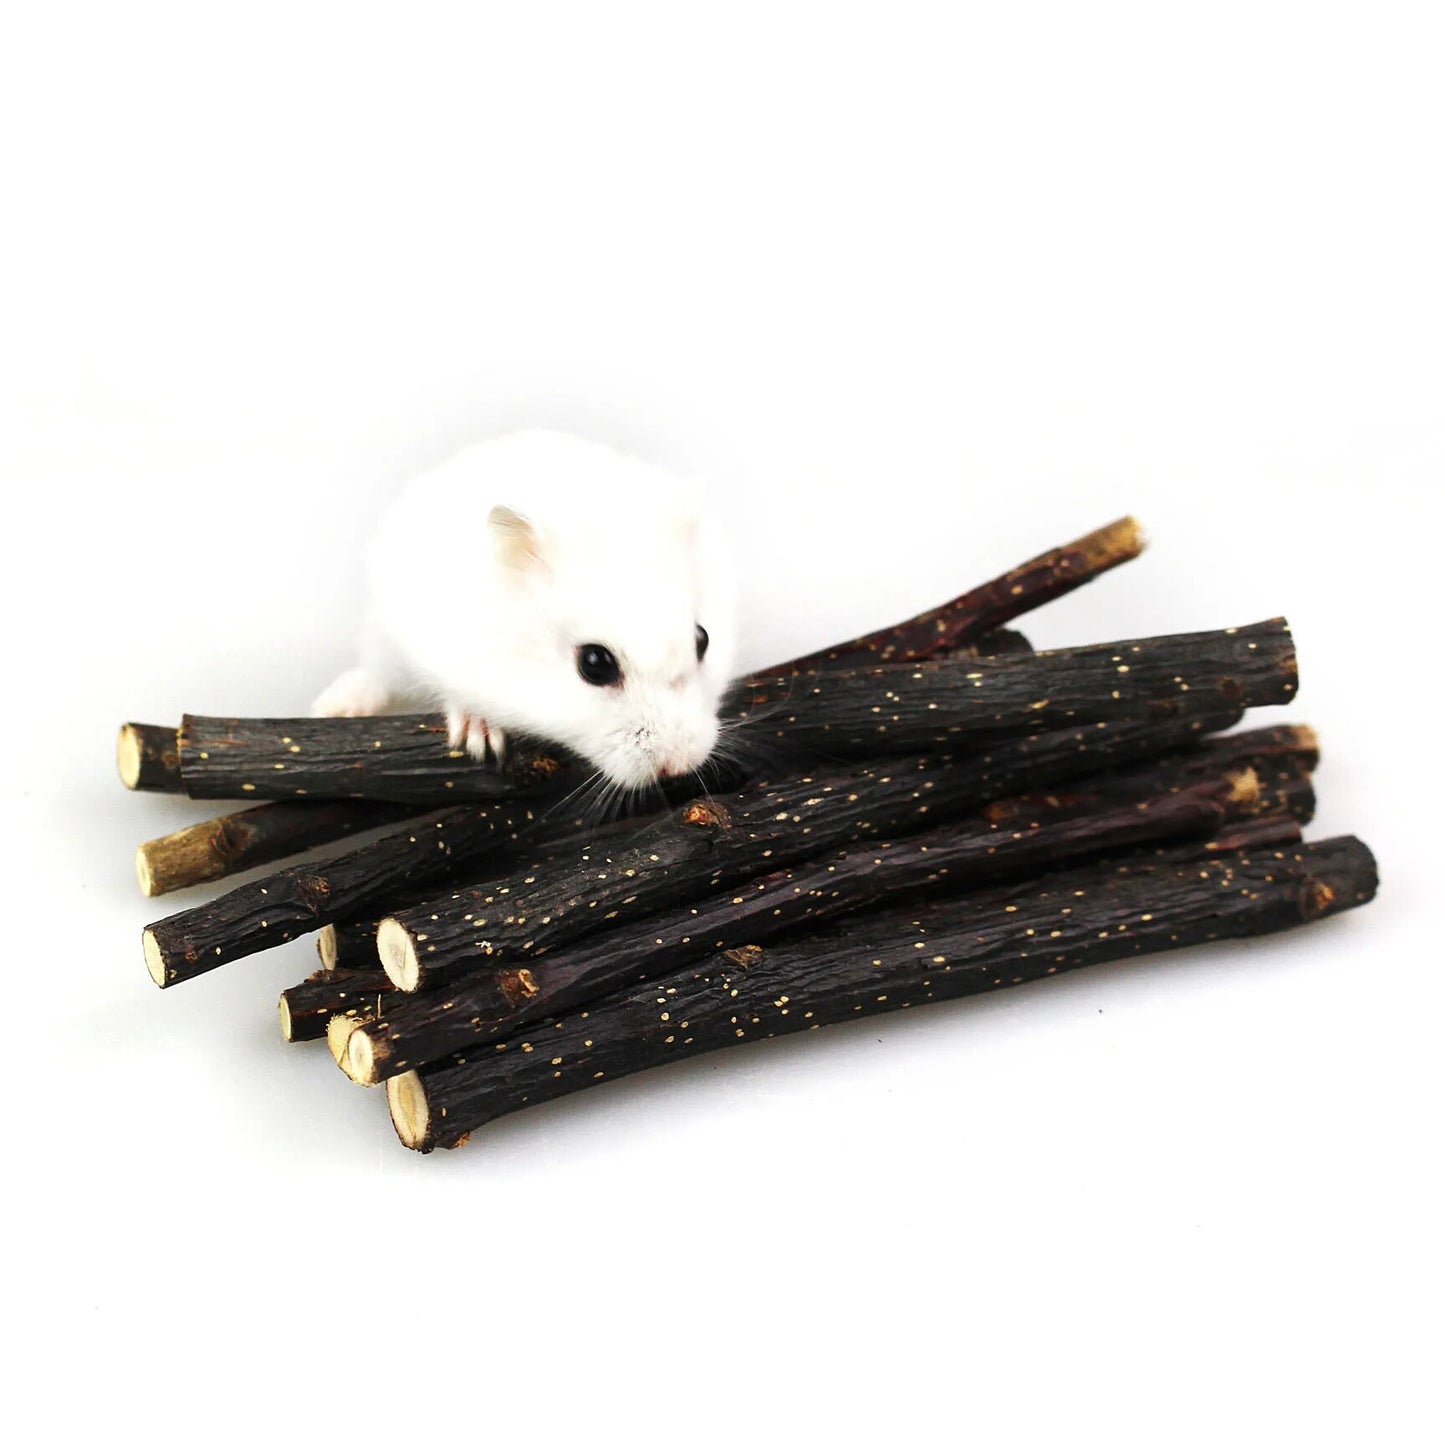 1000g Professional Hamster Rabbit Teeth Grinding Apple Tree Chew Stick Minerals Molar Stone Toys For Chinchilla Small Animal Toy